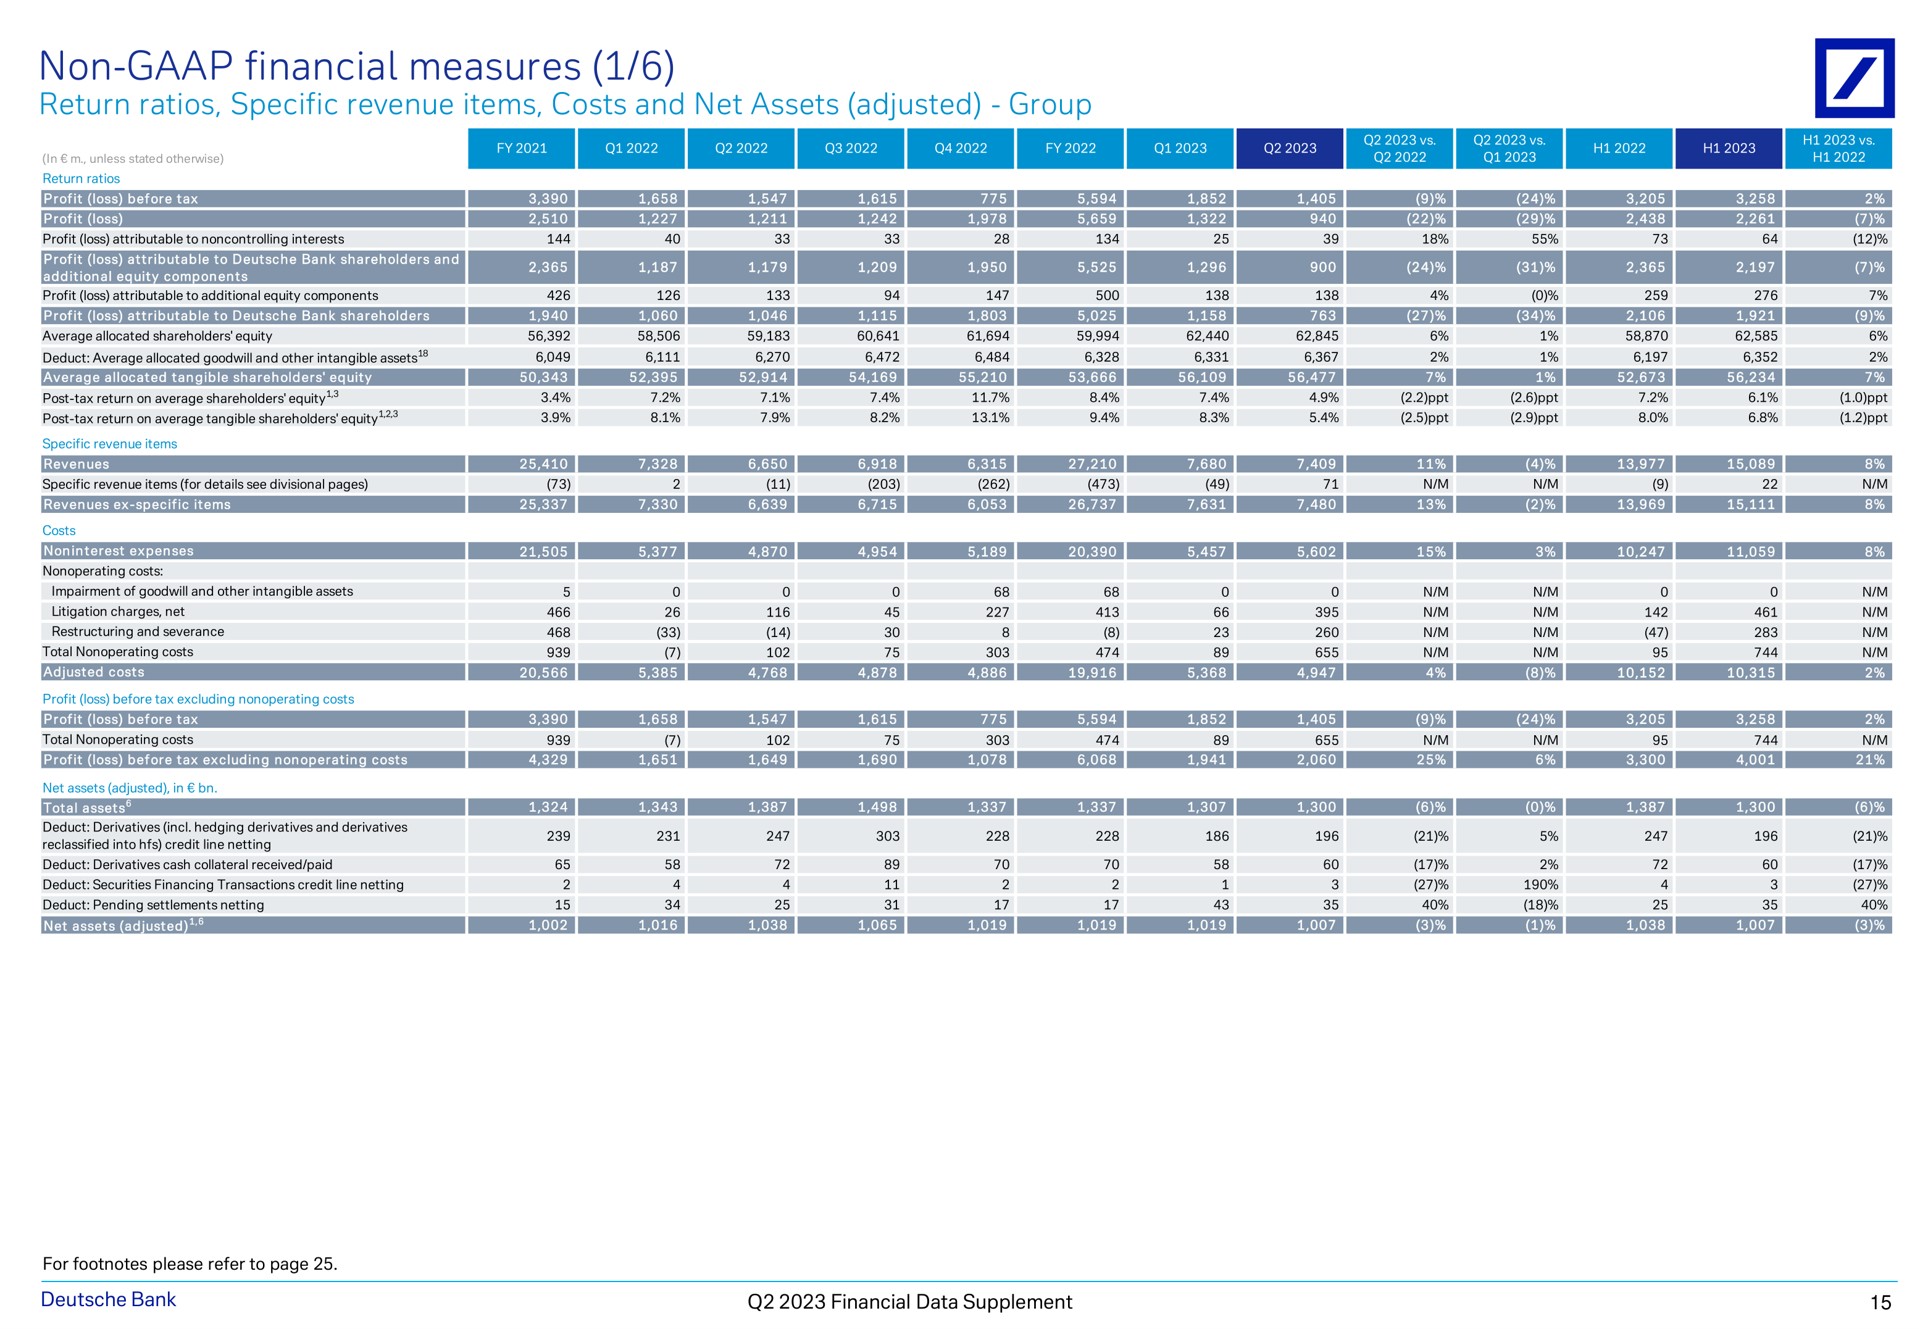 non financial measures return ratios specific revenue items costs and net assets adjusted group a a a a a a cos a coz is tog profit loss as bank data supplement | Deutsche Bank